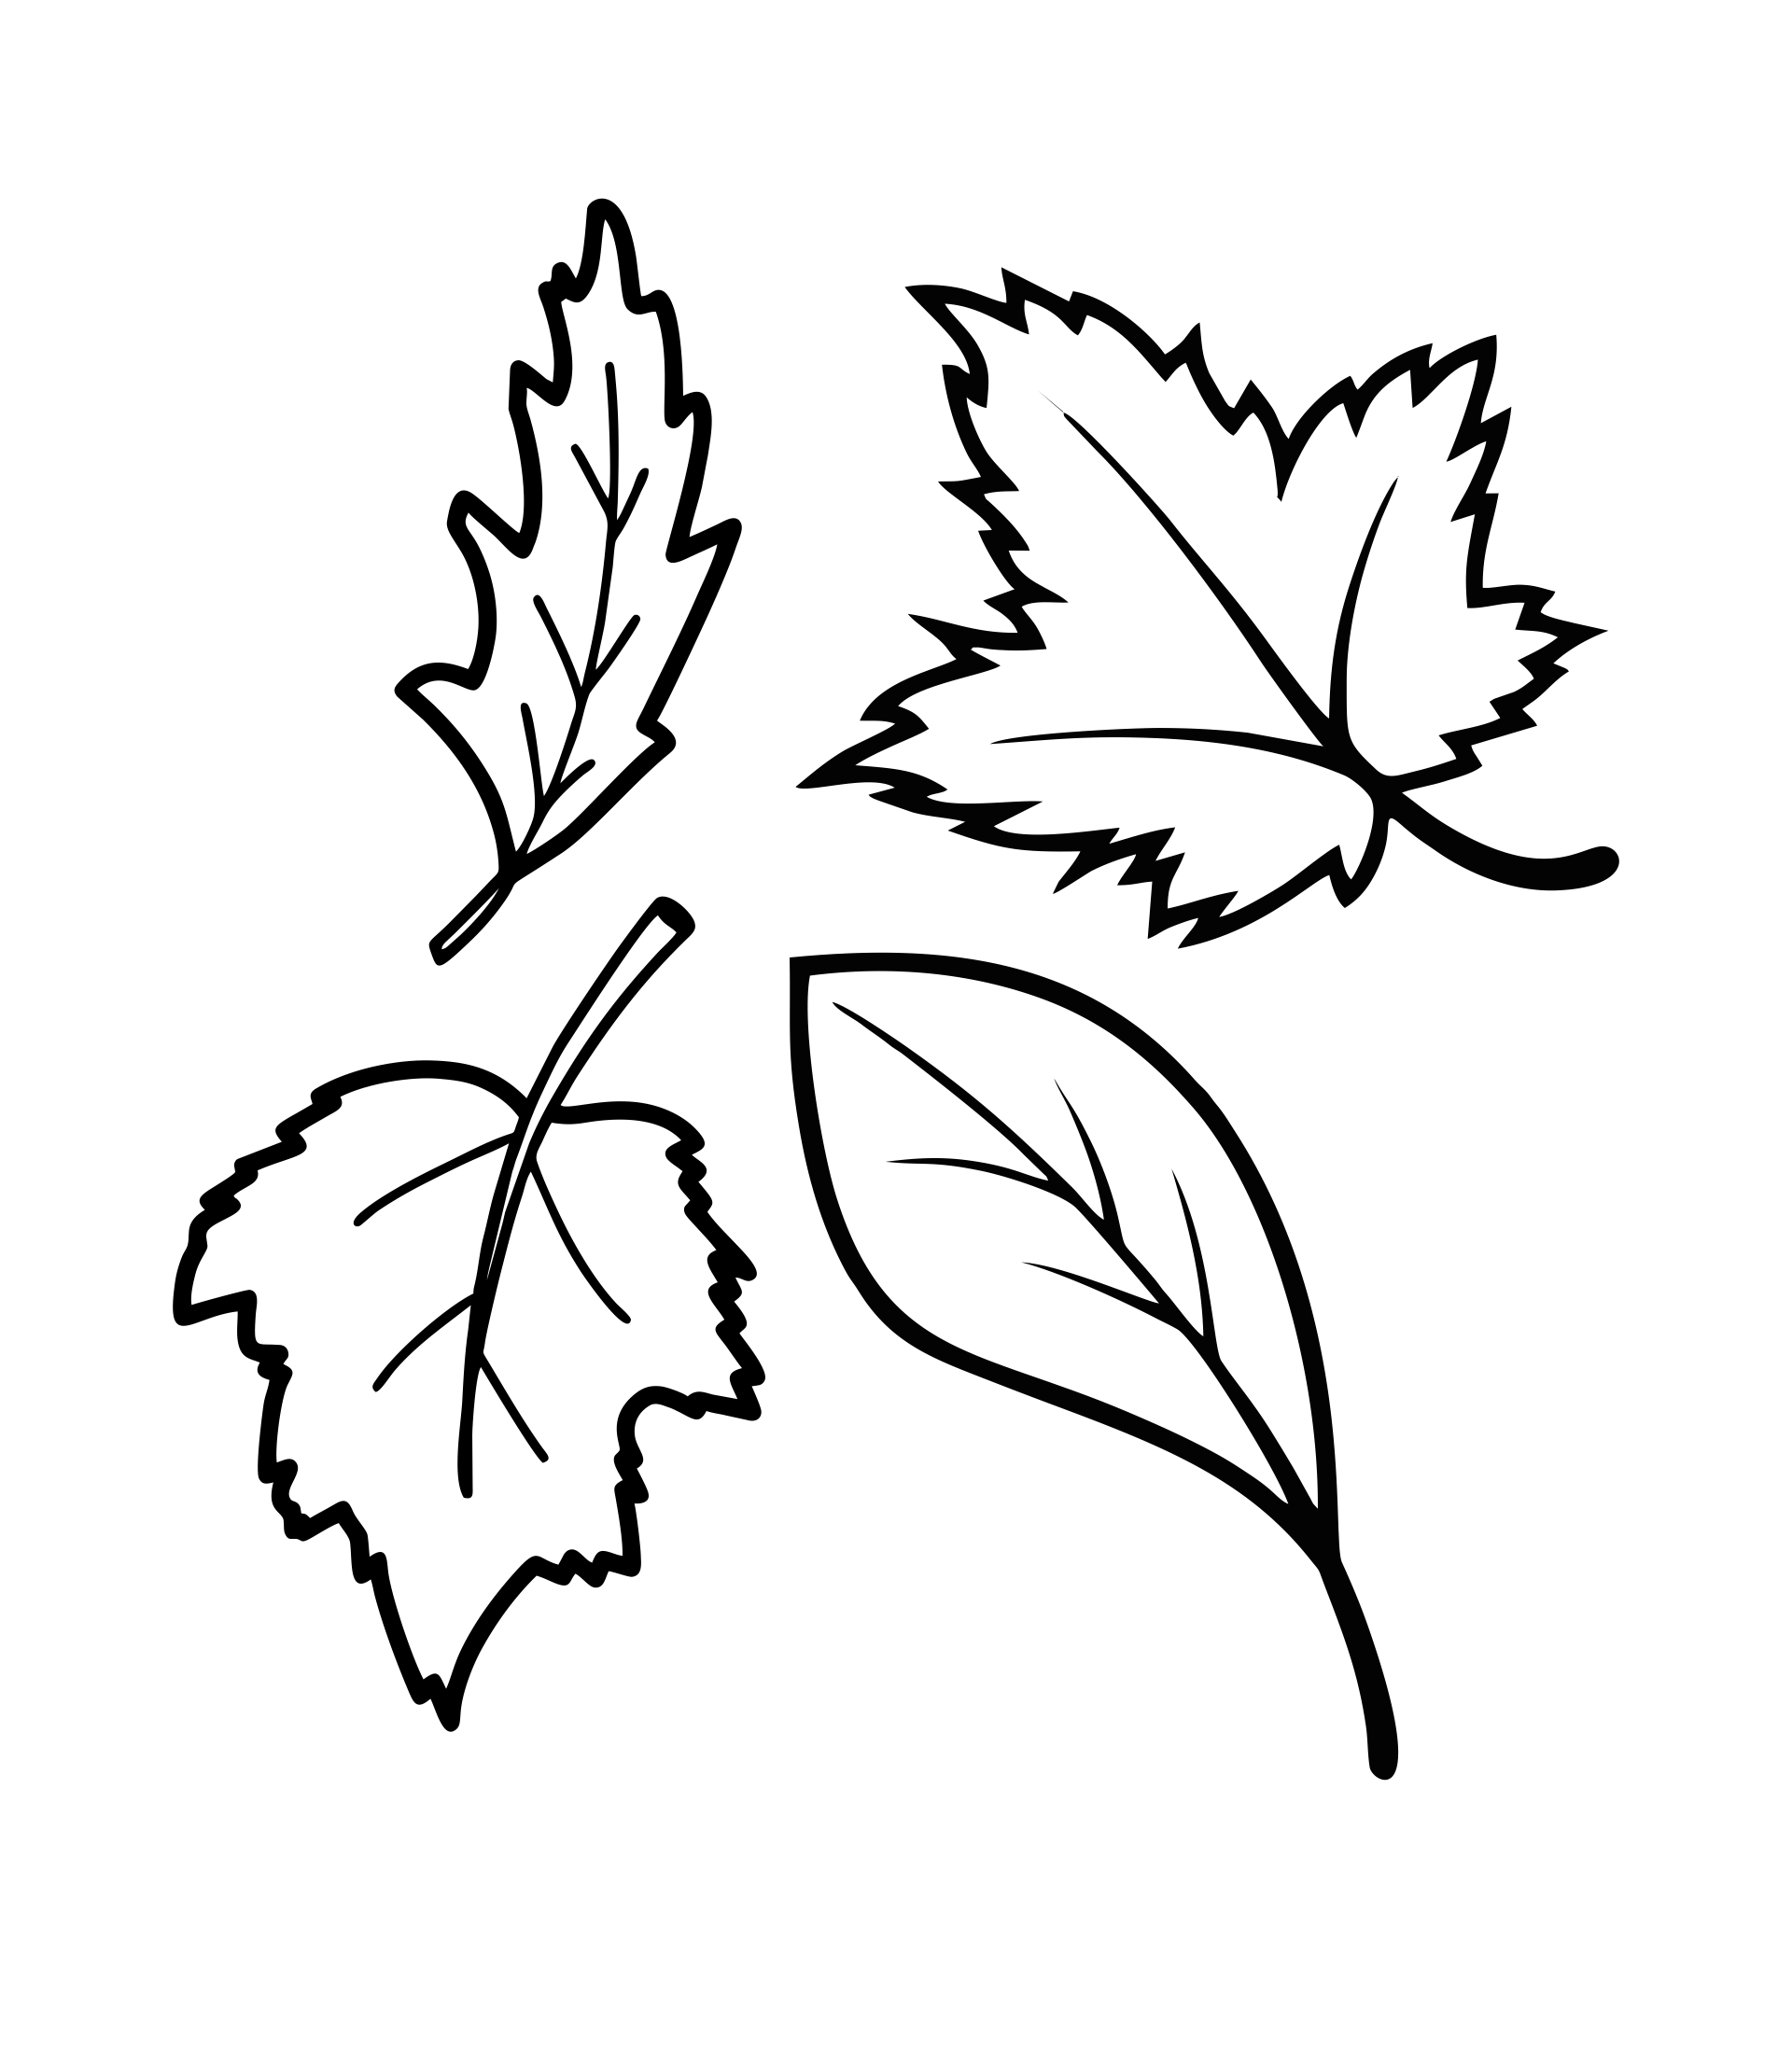 fall leaves coloring pages printable